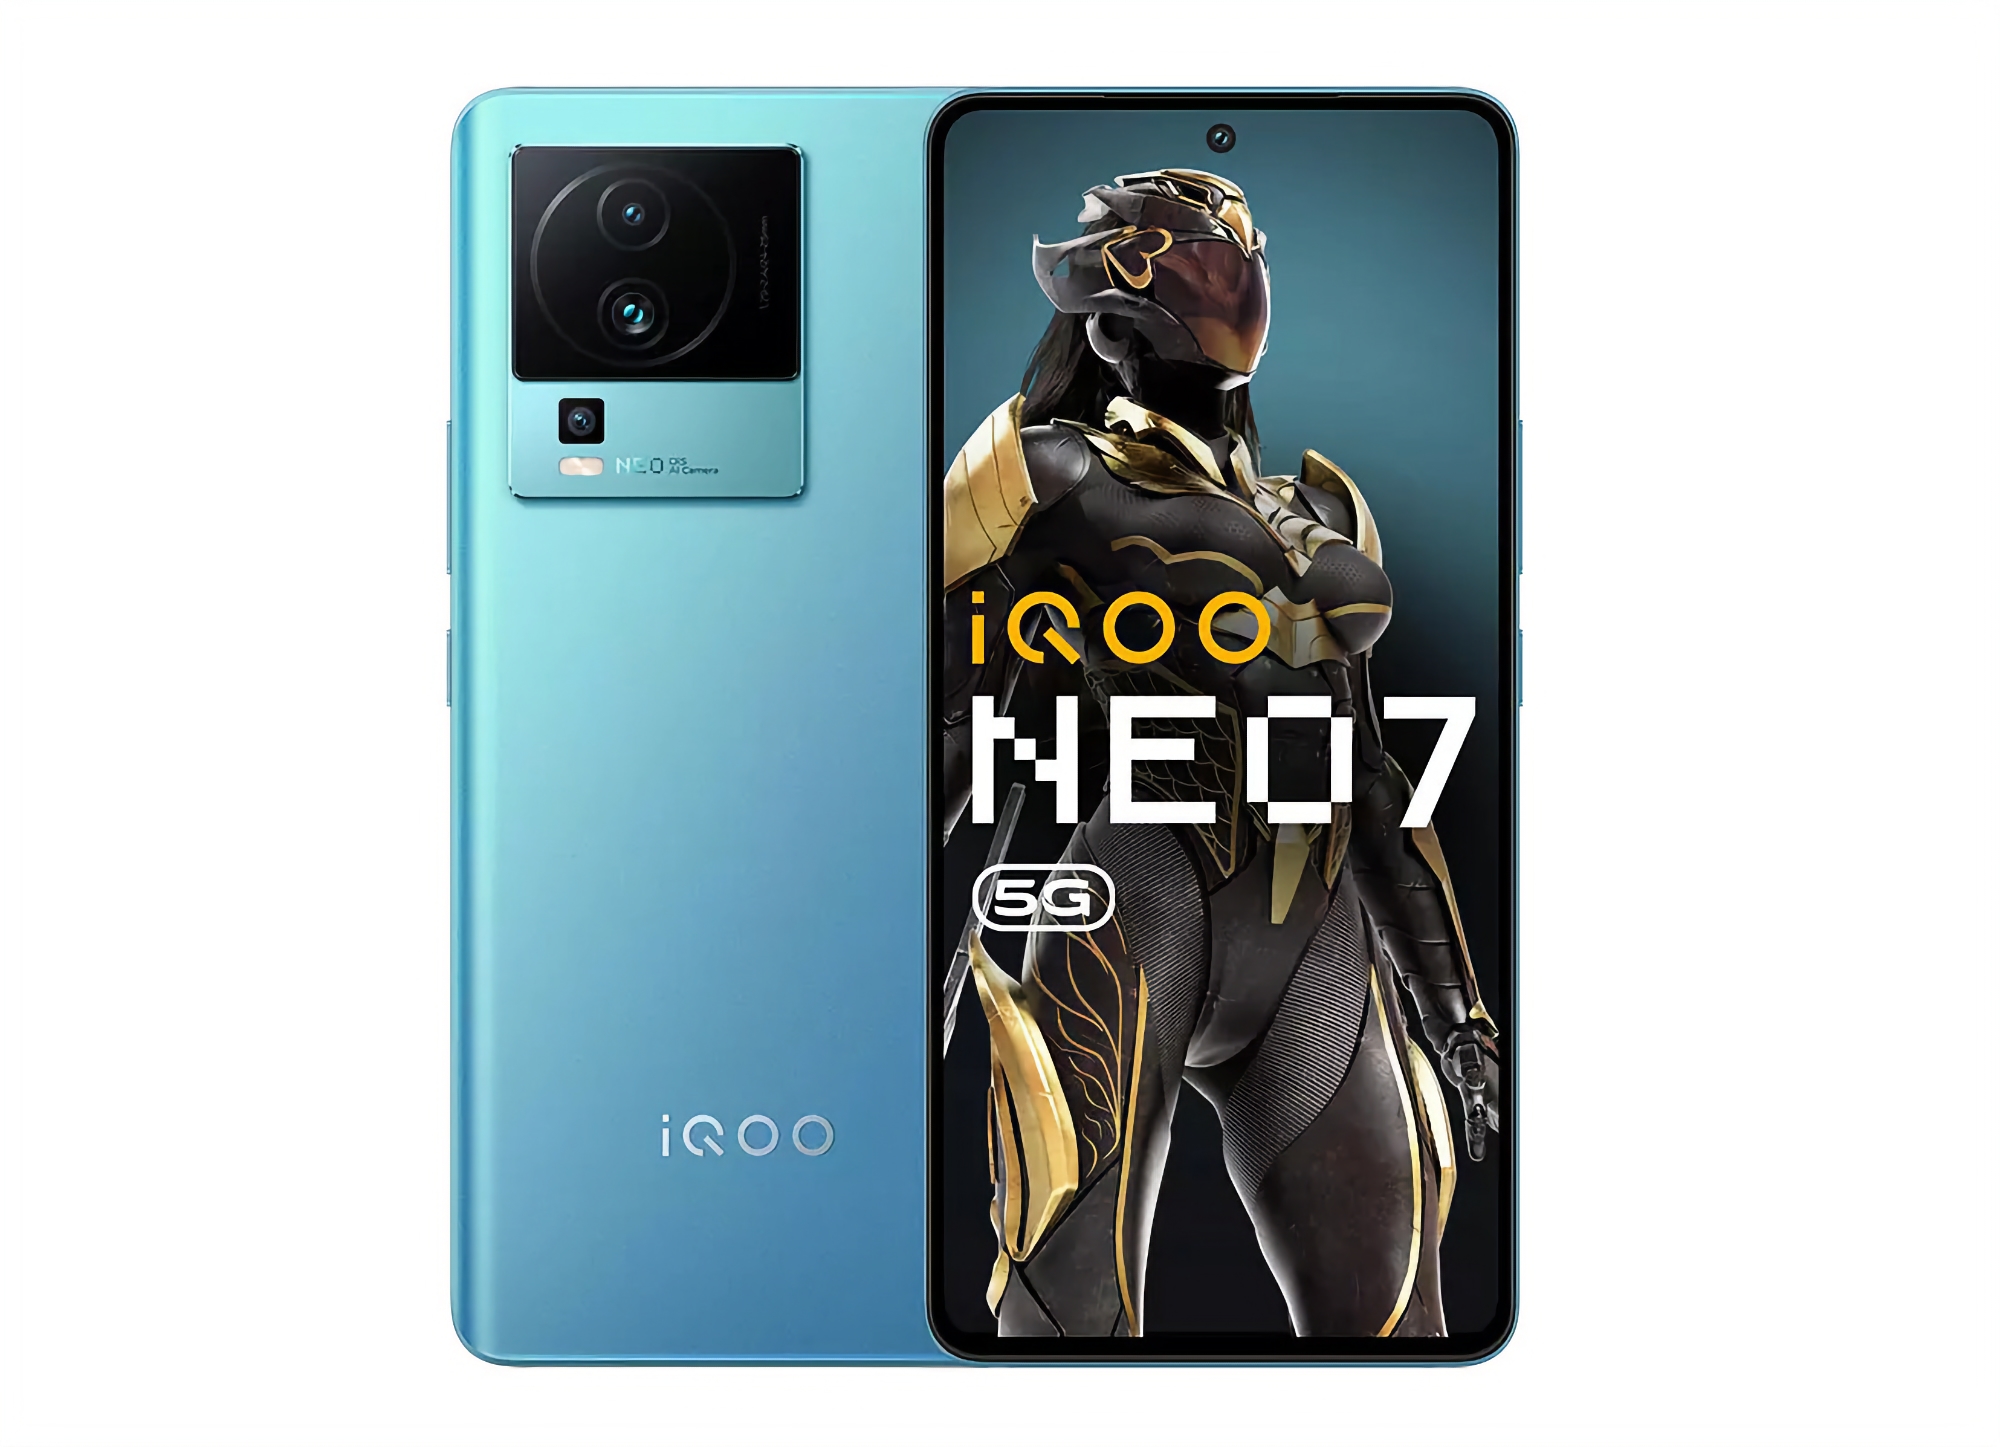 vivo unveils iQOO Neo 7: 120Hz OLED screen, MediaTek Dimensity 8200 chip and 120W charger for $362